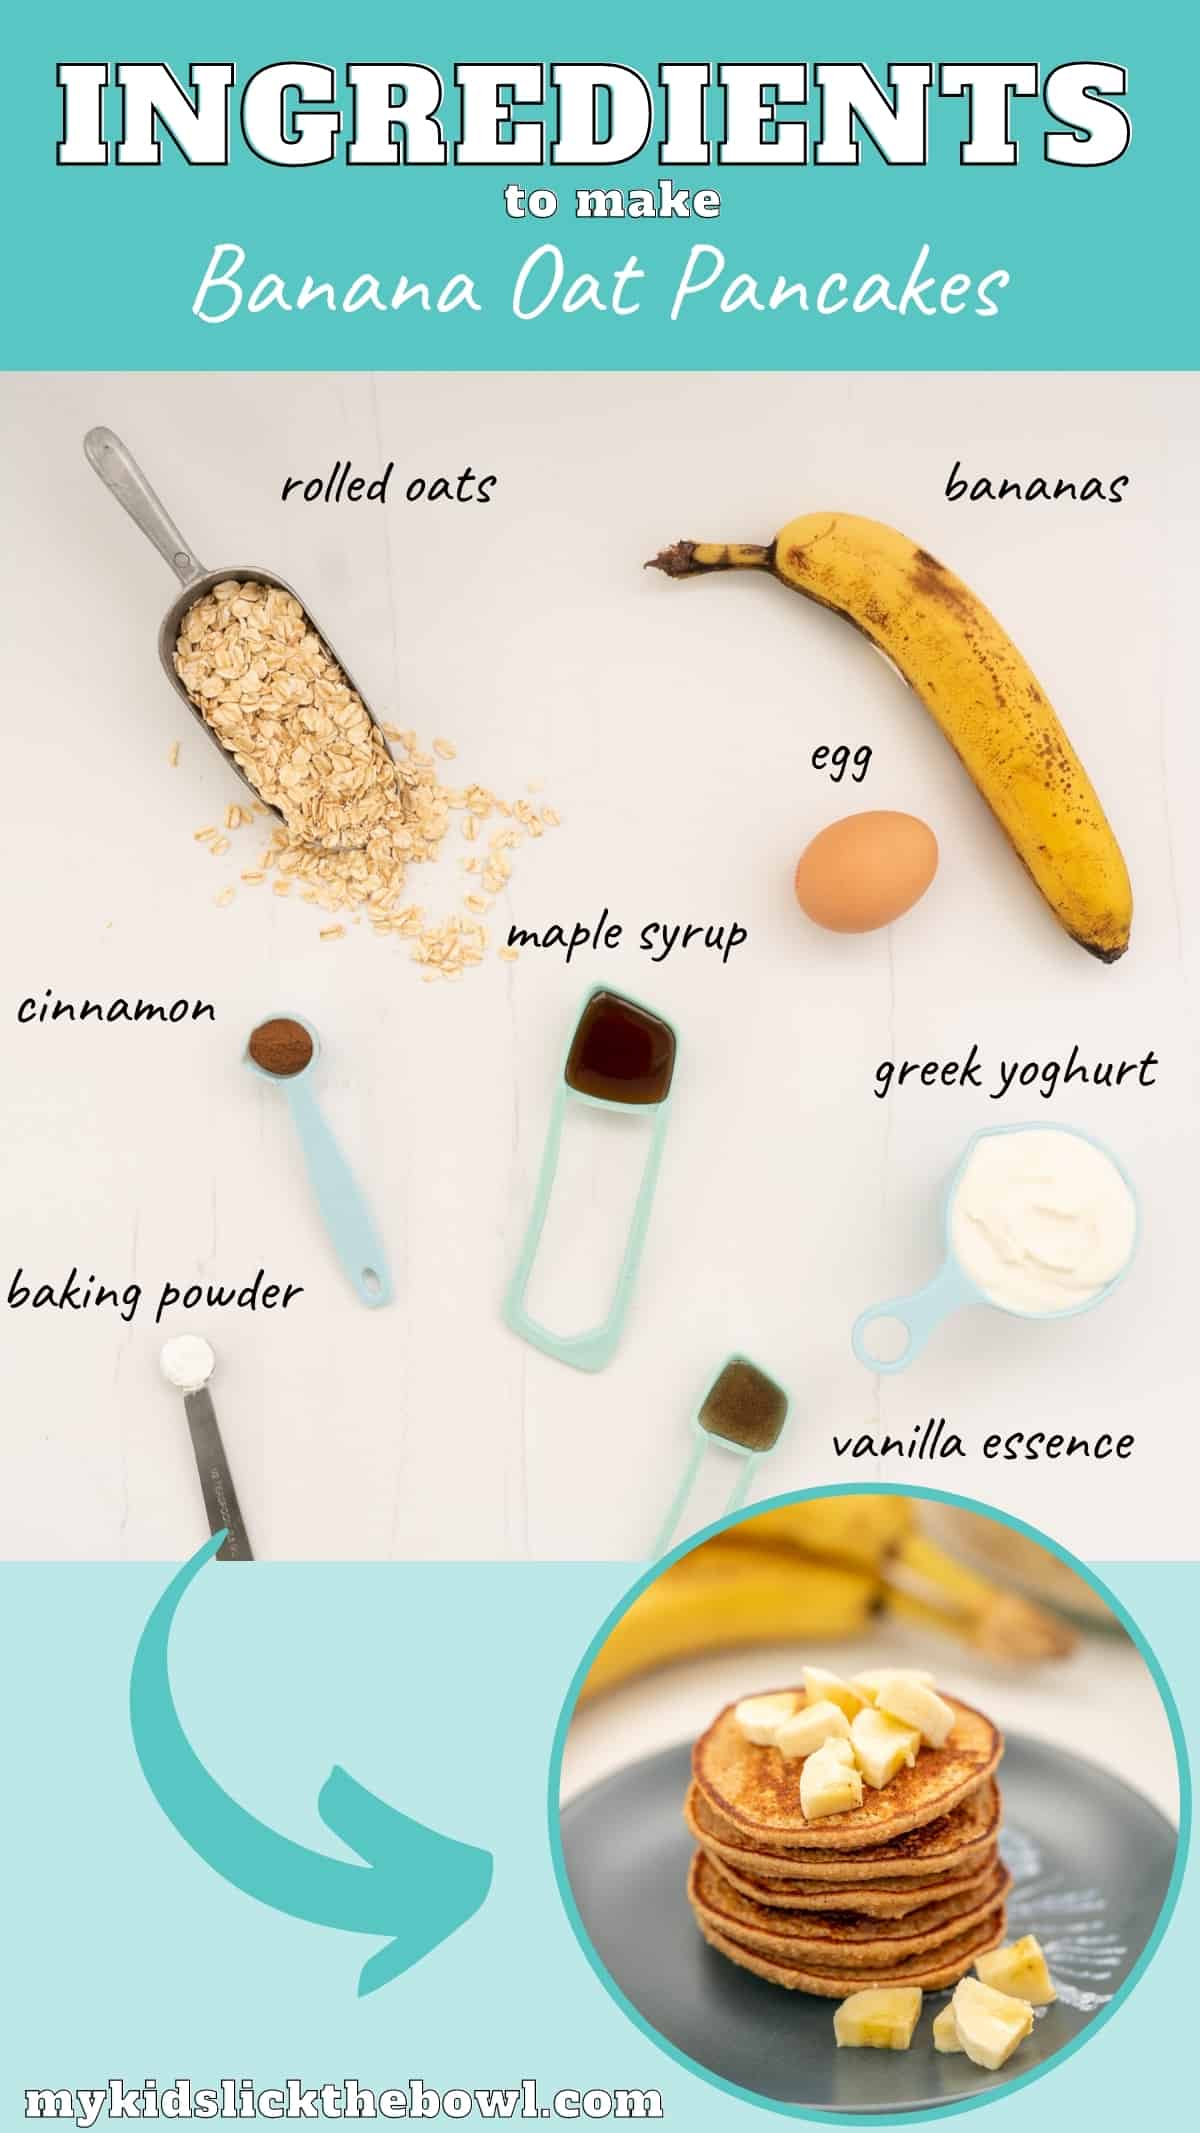 The ingredients to make banana oat pancakes laid out on a bench top with text overlay.